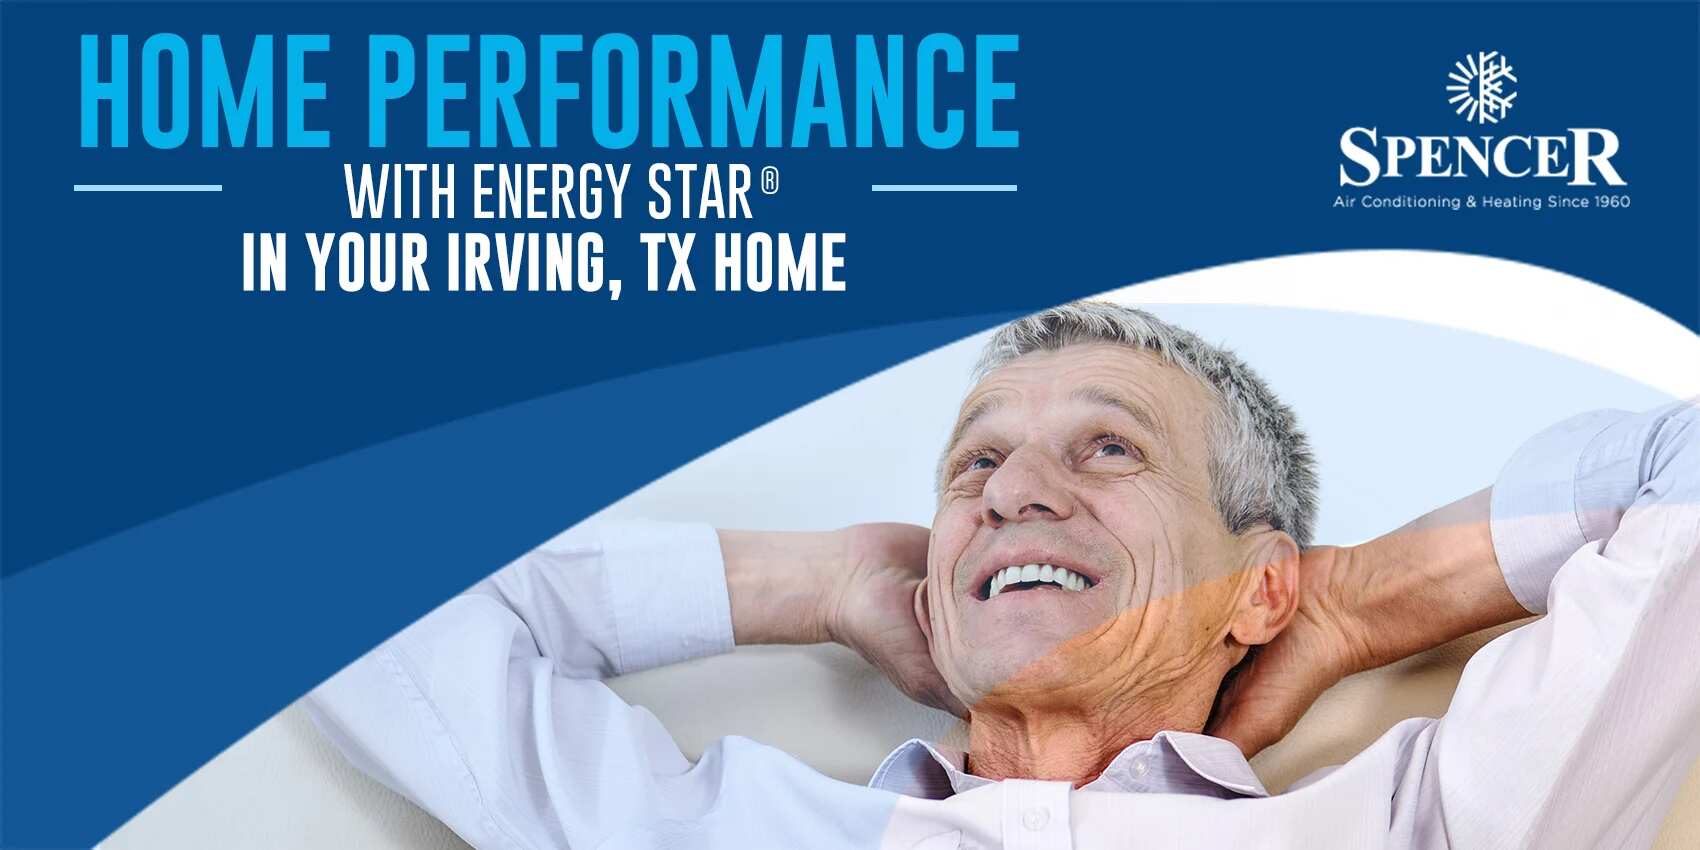 Home Performance with ENERGY STAR® in Your Irving, TX Home